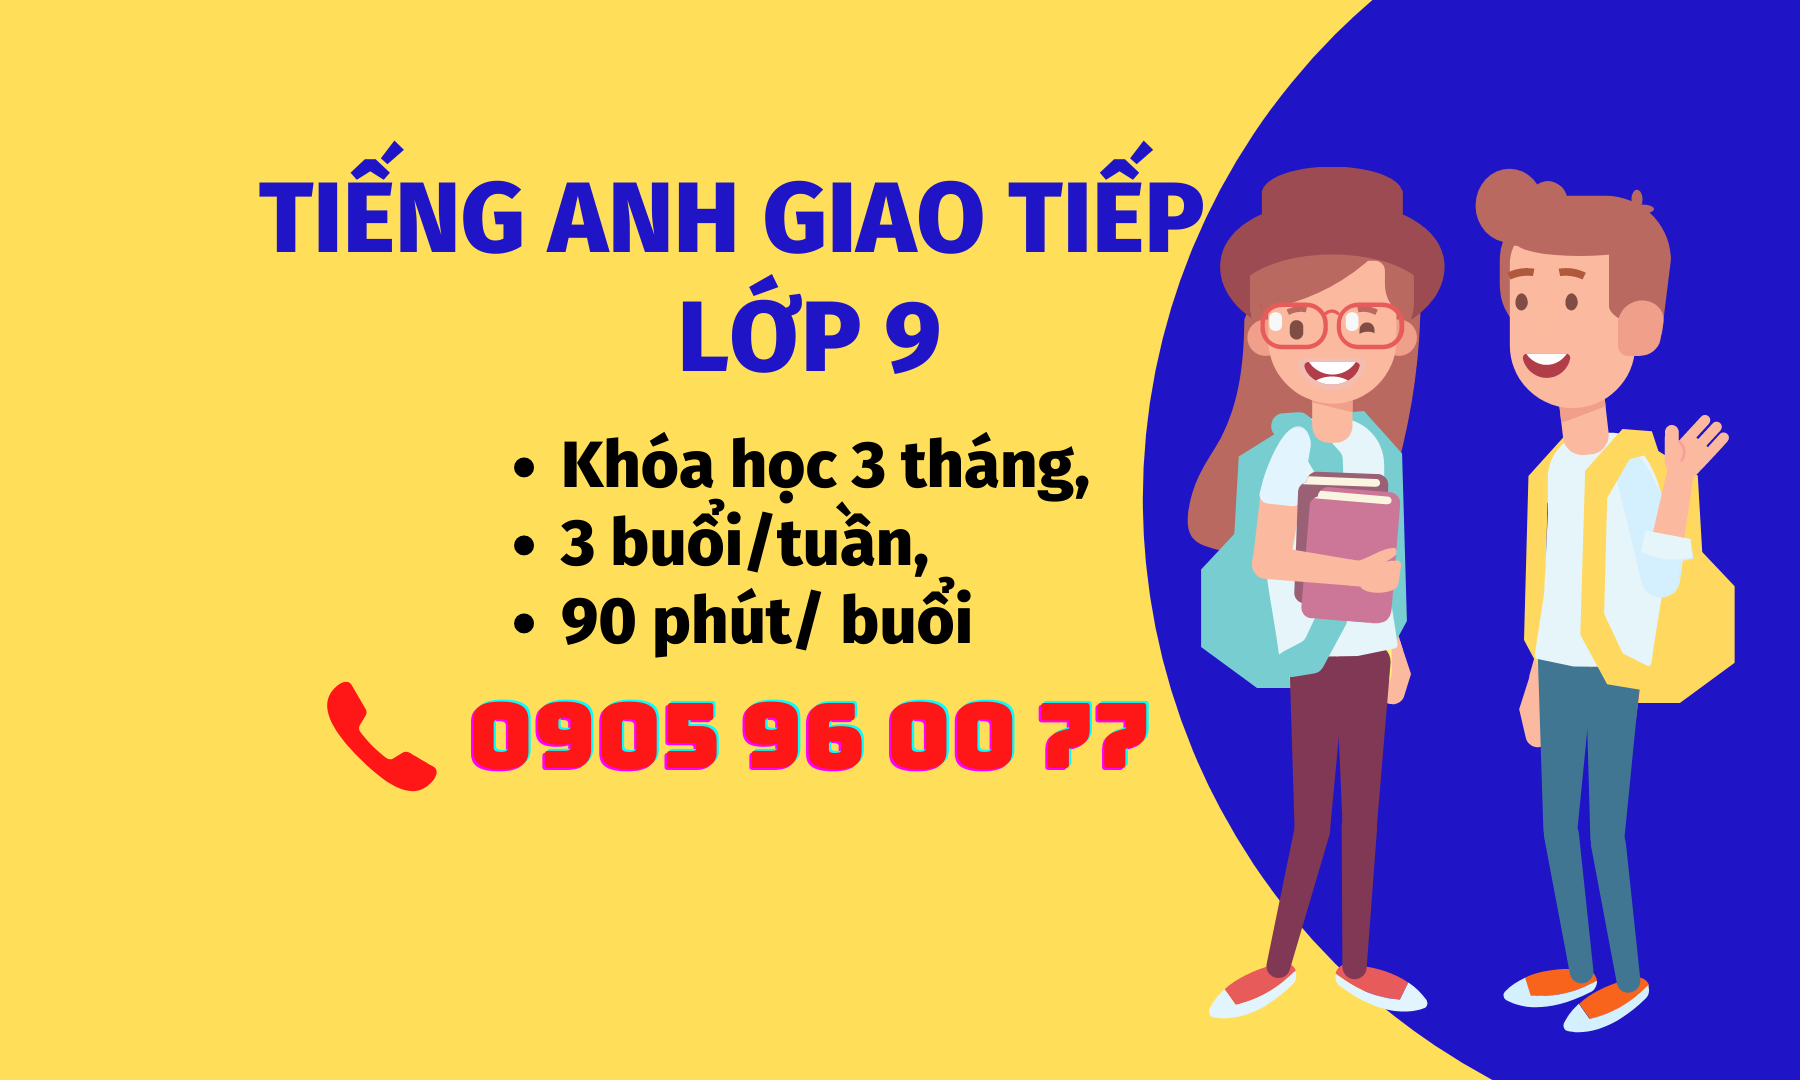 TIẾNG ANH GIAO TIẾP lớp 9